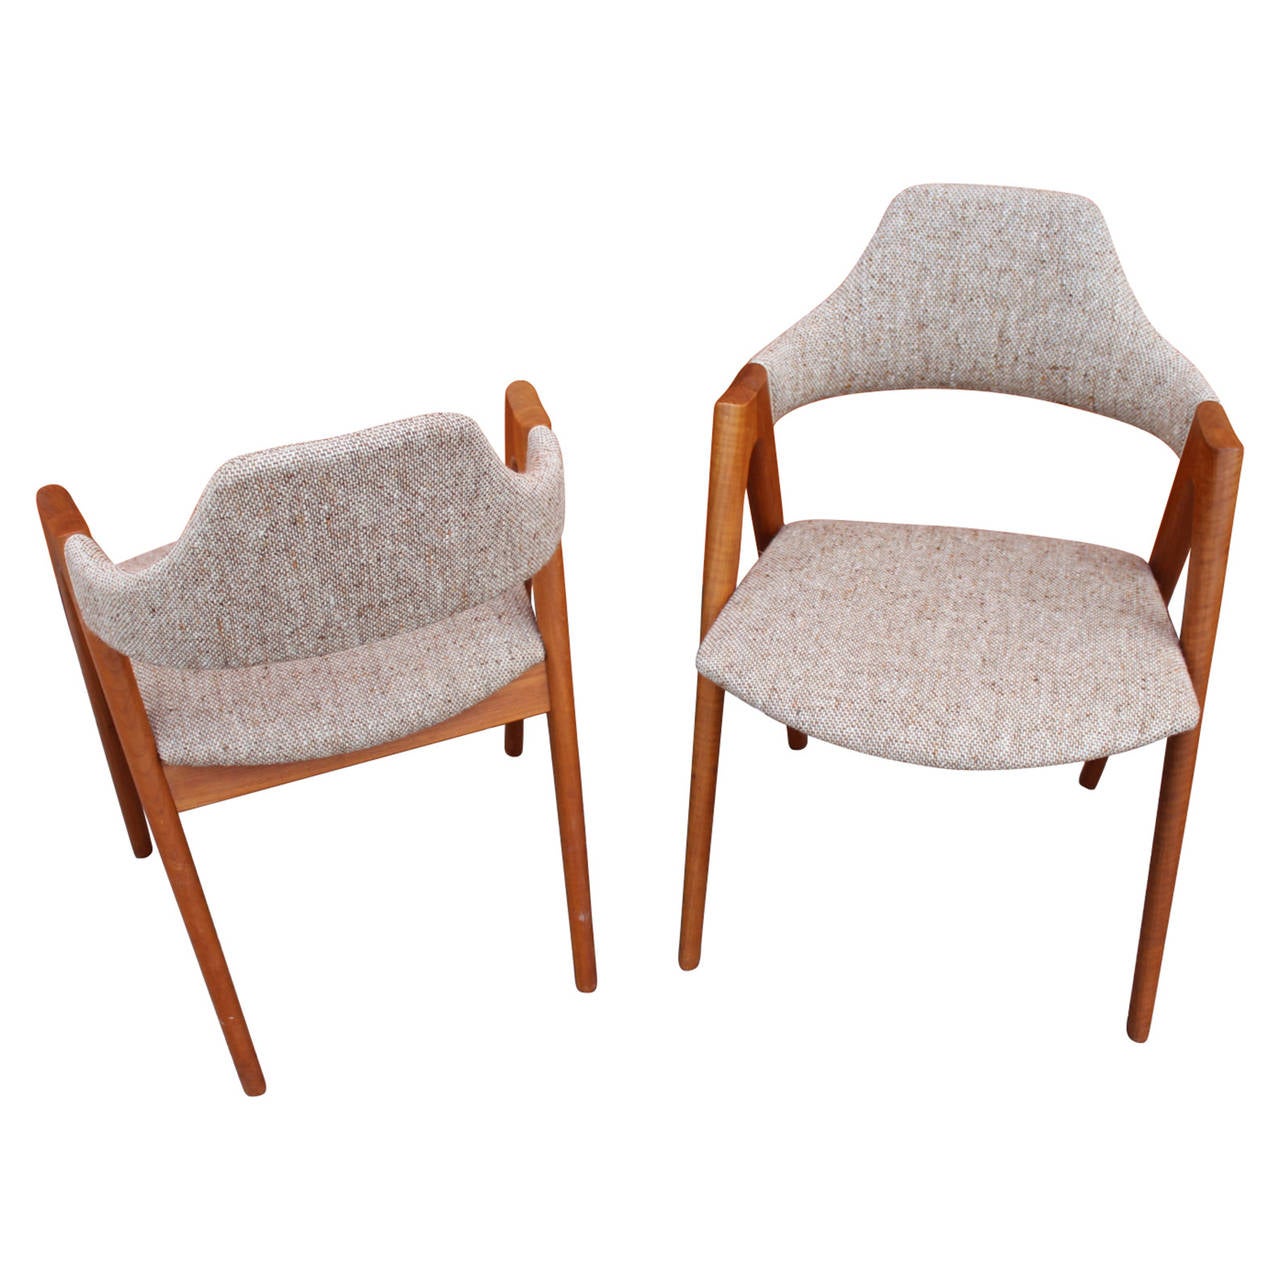 Compass dining chairs by Kai Kristiansen manufactured by Schou Andersen furniture factory, from 1960-1969. The chairs are made of teak and the seats are in wool. The model is rare.